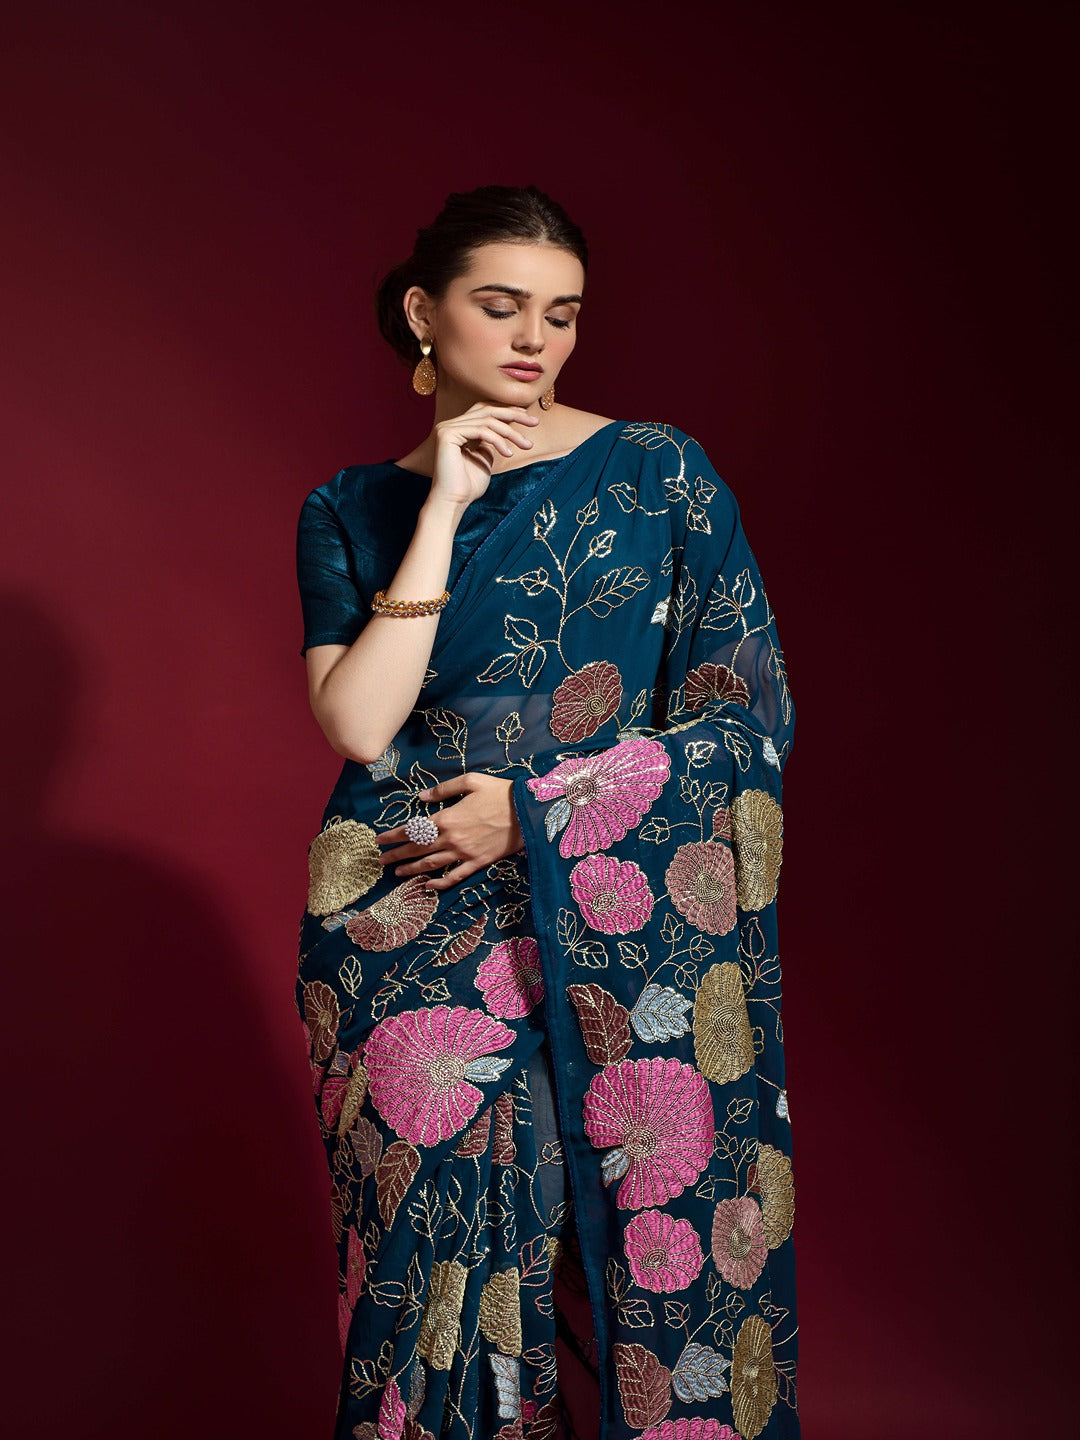 Women Teal Blue Floral Embroidered Saree